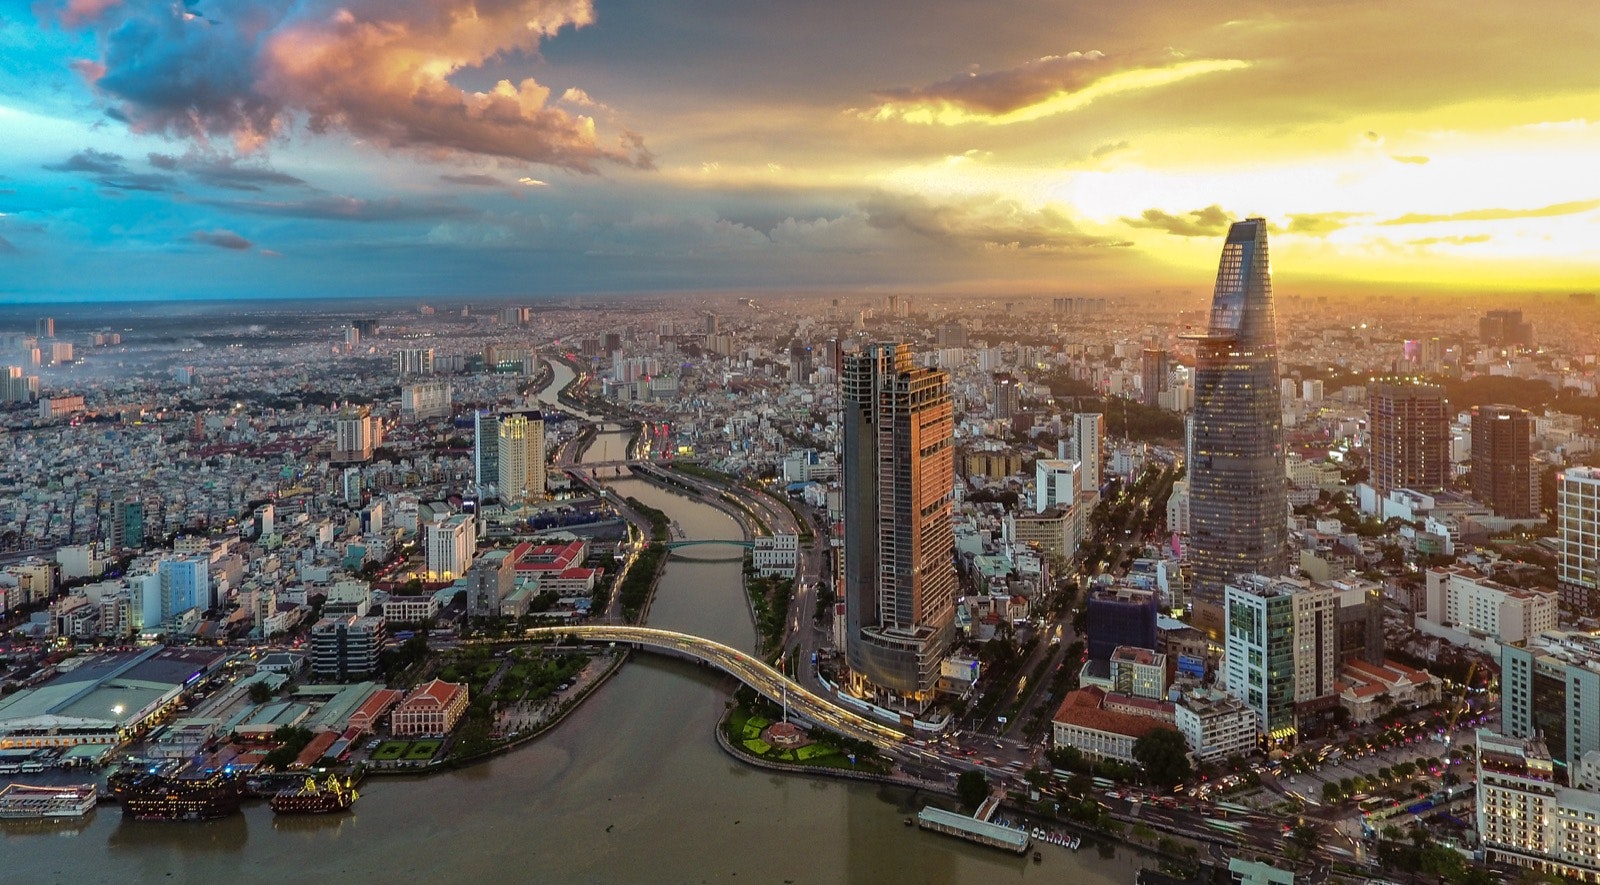 The financial district of the Ho Chi Minh City skyline with a river winding its way through the city